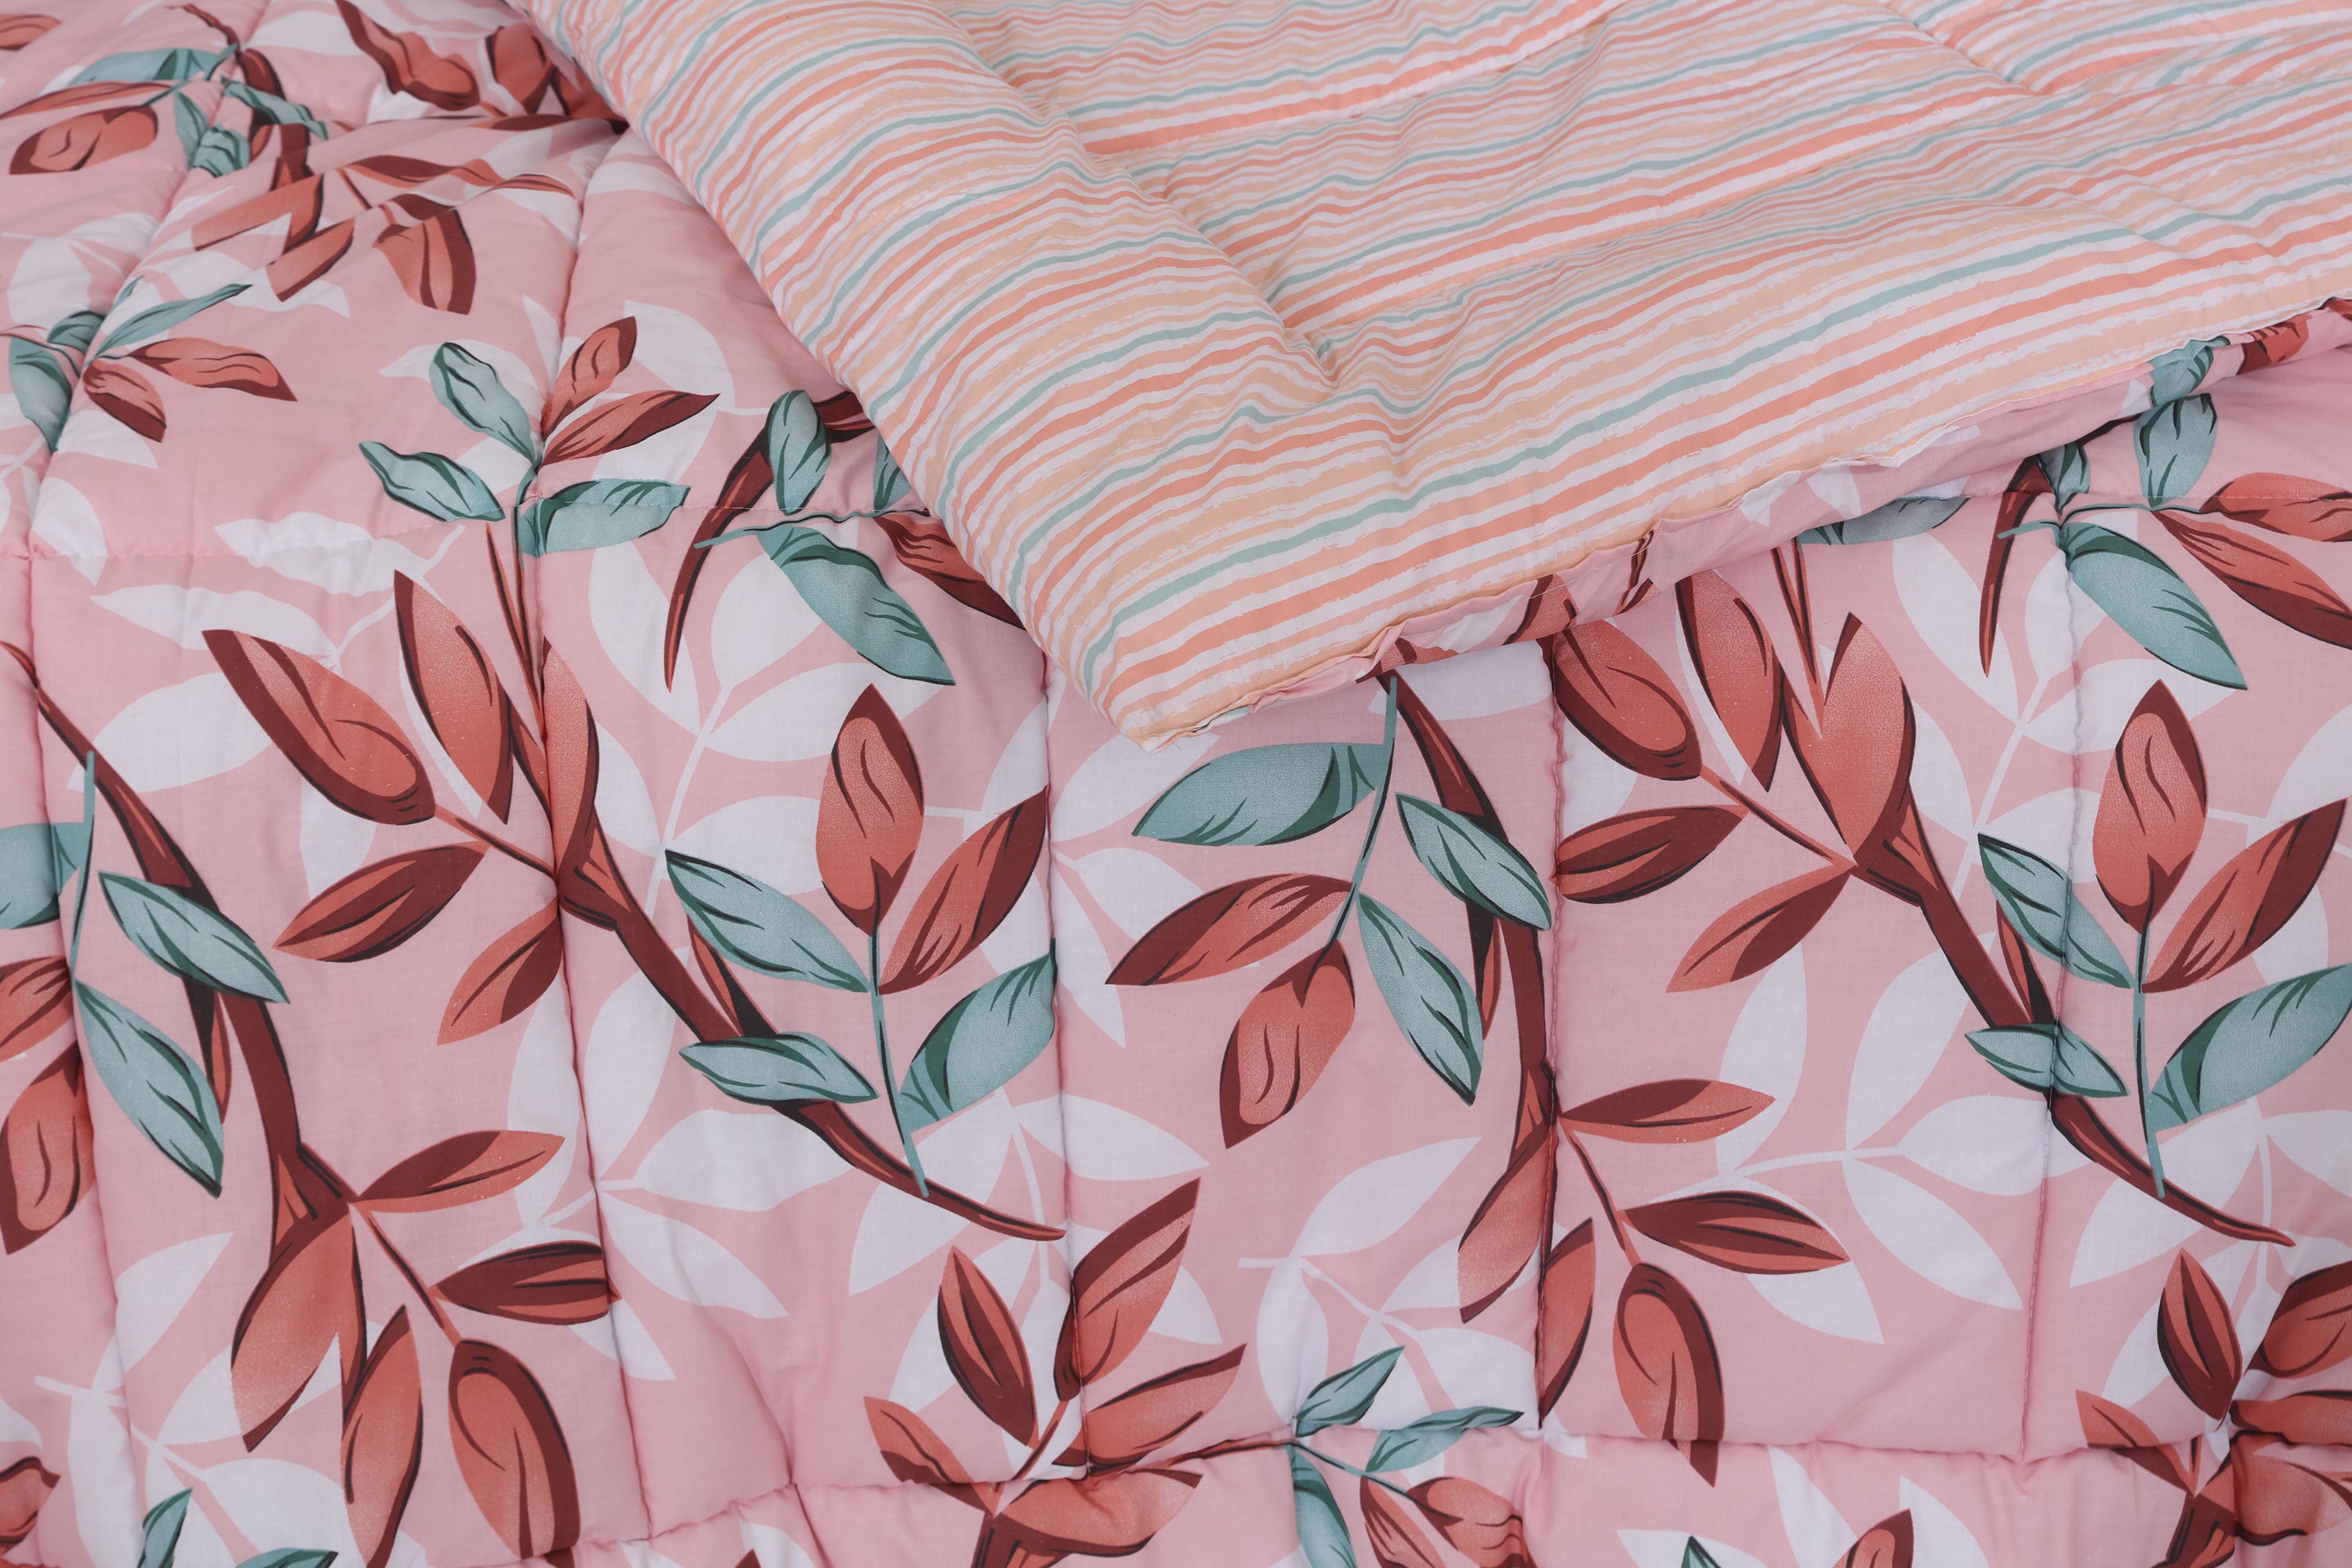 Pink Forest - 6pc Cotton Winter Comforter Set (Heavy Filling).